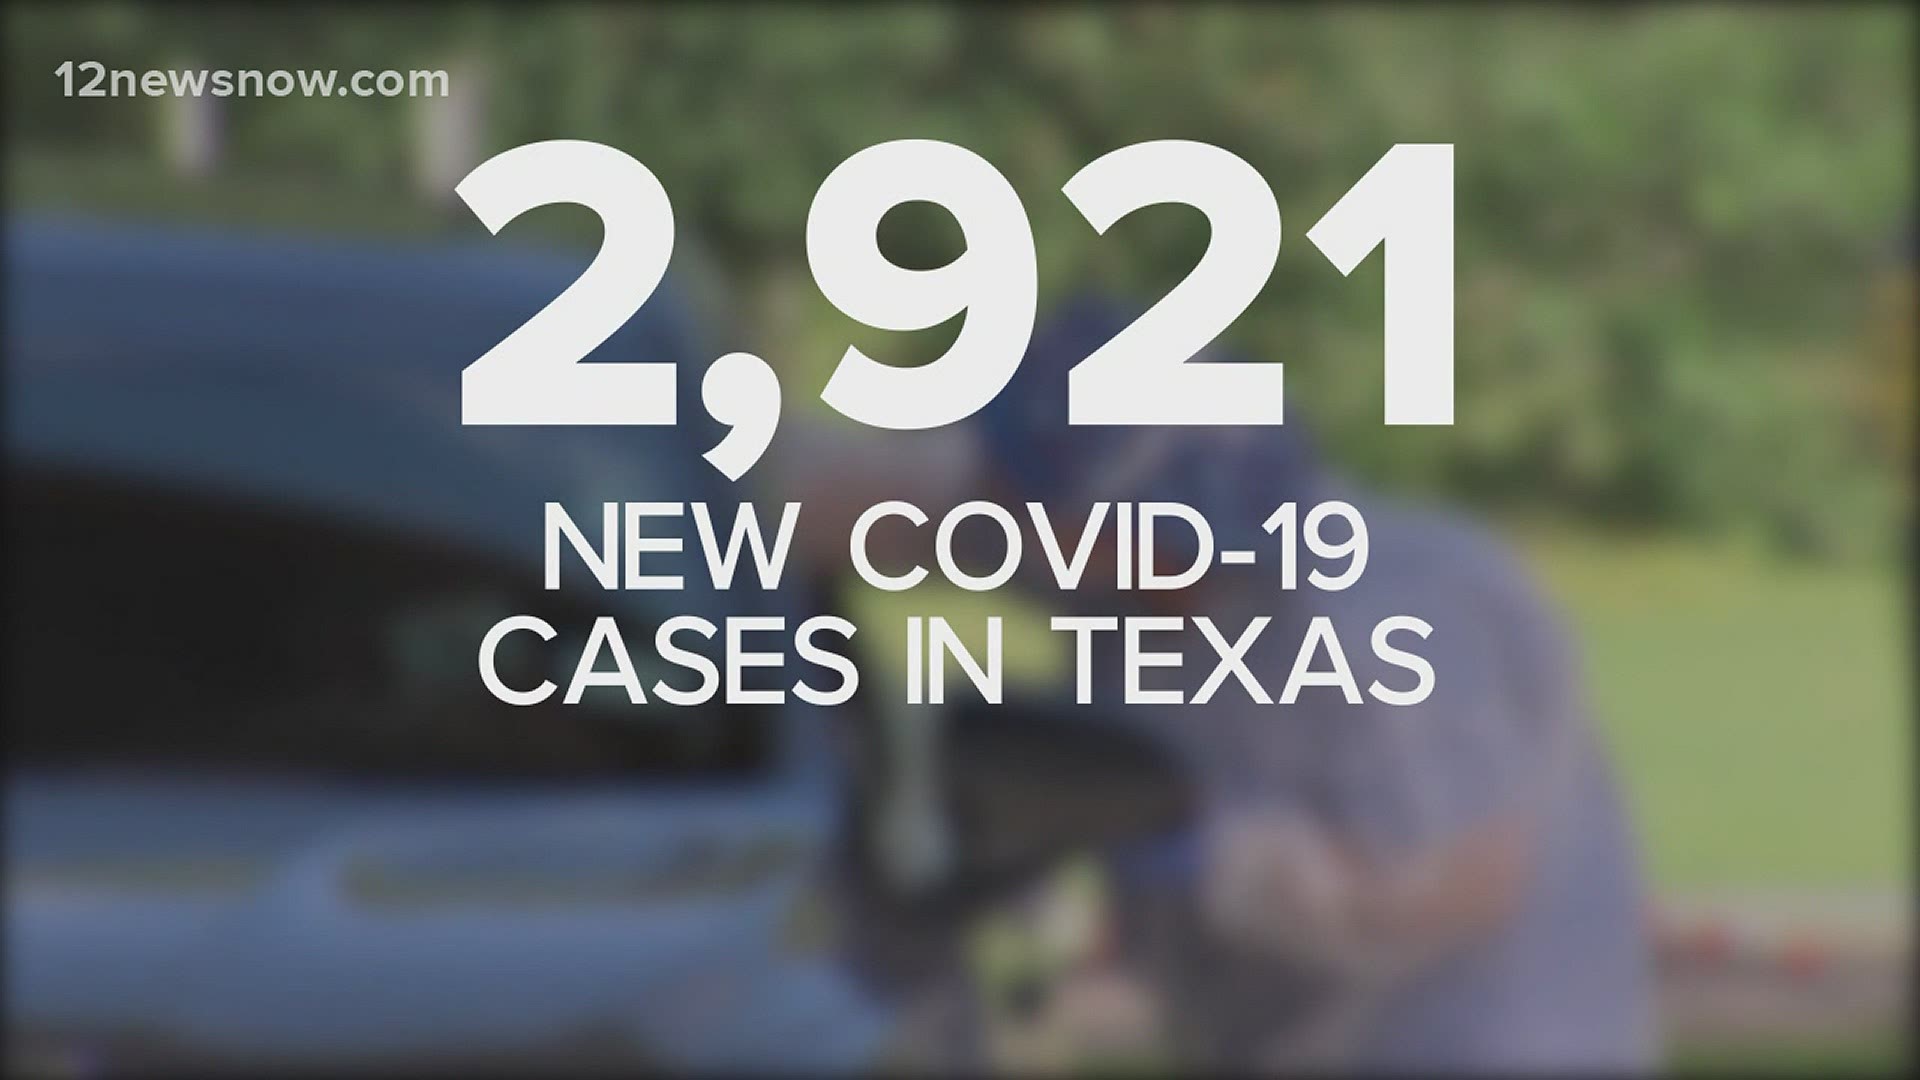 Health experts said COVID-19 cases have not increased yet, but Southeast Texas typically lags behind state trends and expect cases to rise after spring break.